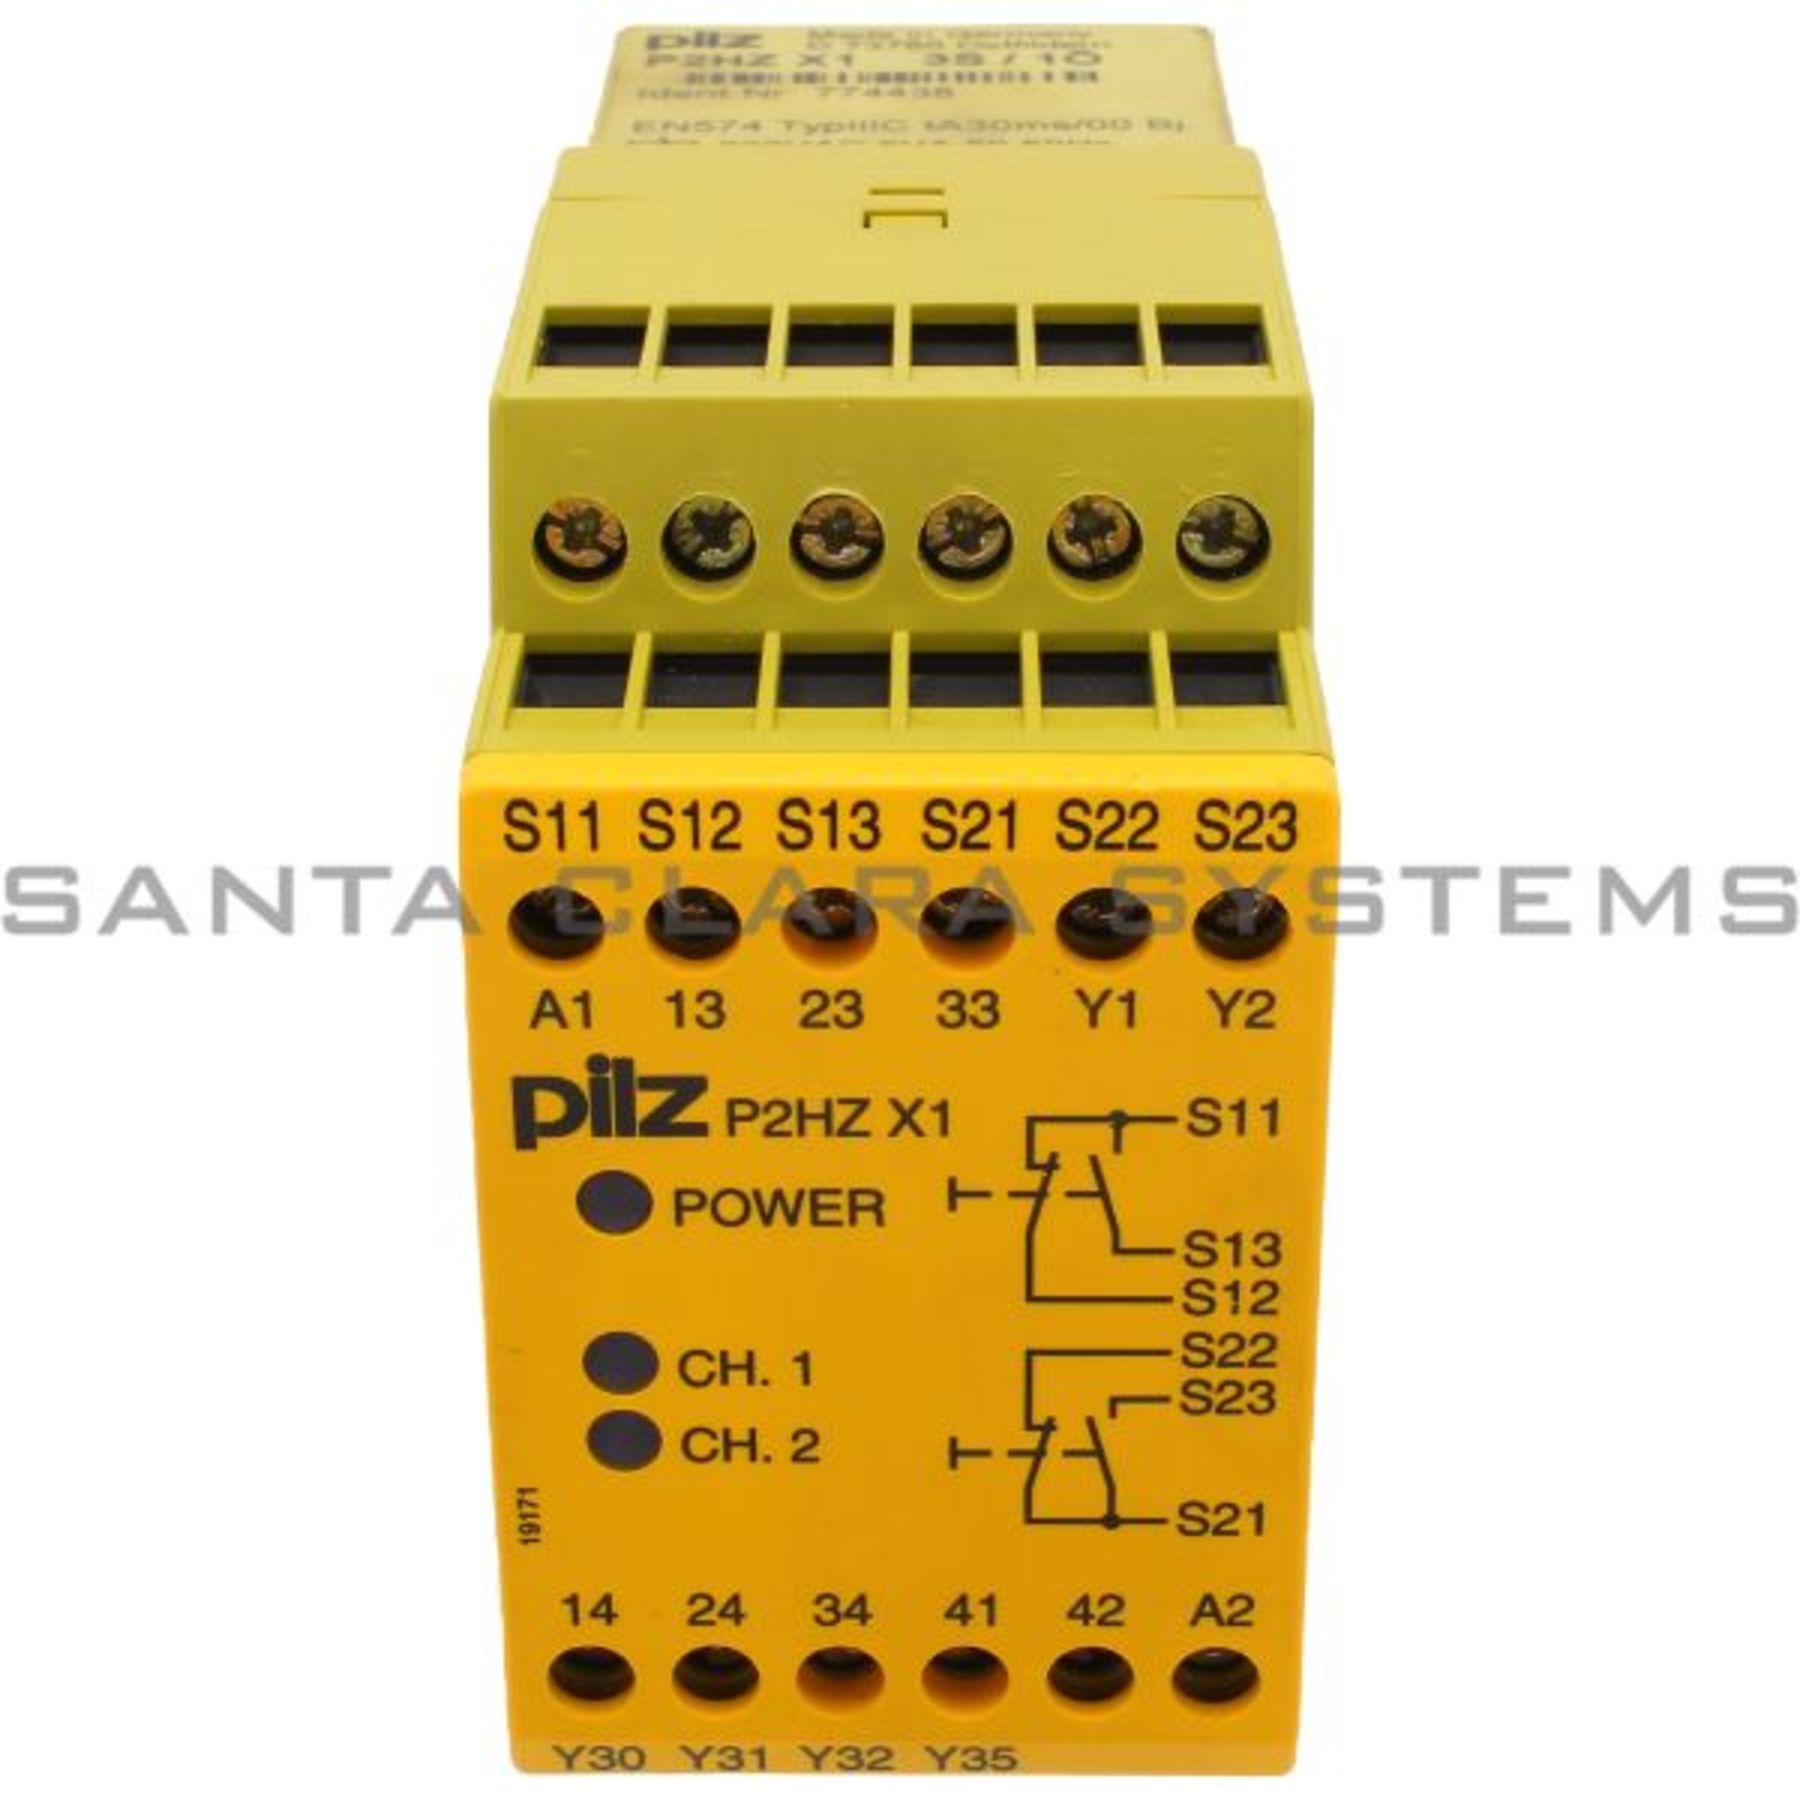 P2hzx13s 10 Safety Relay Standalone Inputs 1 N O 1 N C Per Pushbutton Outputs 3 N O 1 N C 2 Semiconductor Ub 230 V Ac Width In Stock And Ready To Ship Santa Clara Systems